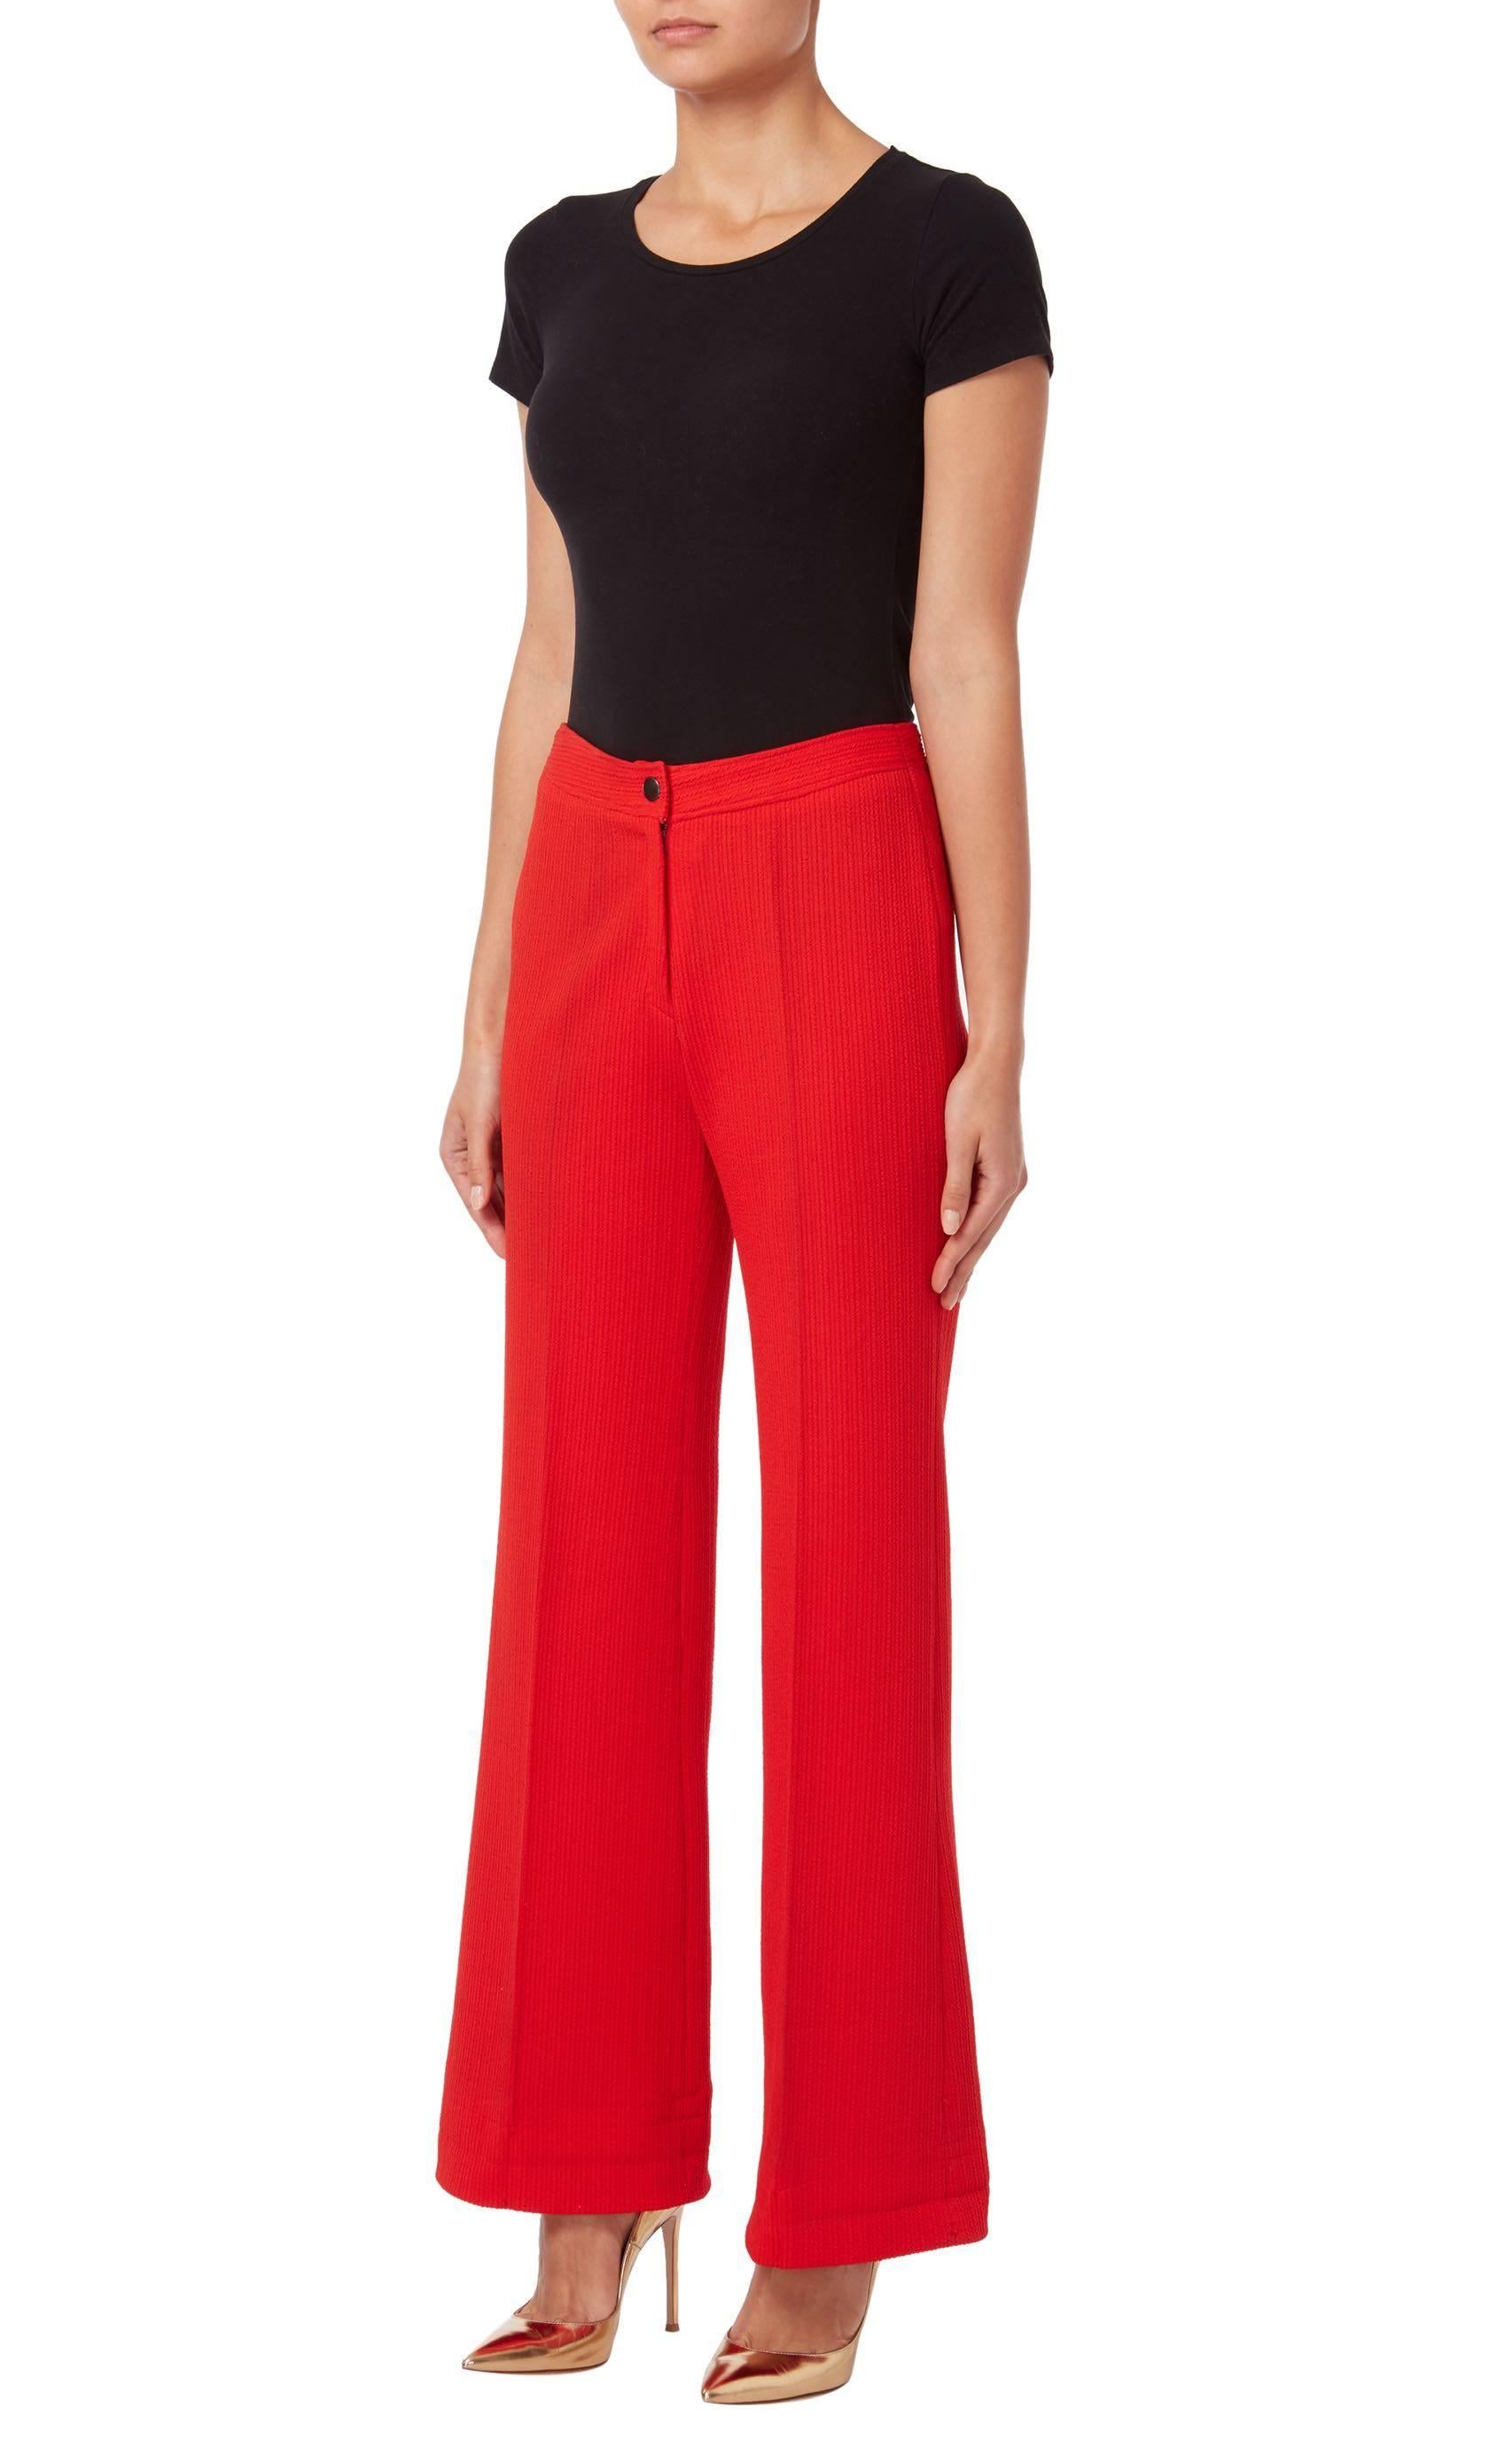 Red trousers from 1972. The trousers are slightly flared and are secured by one button to the waistband.